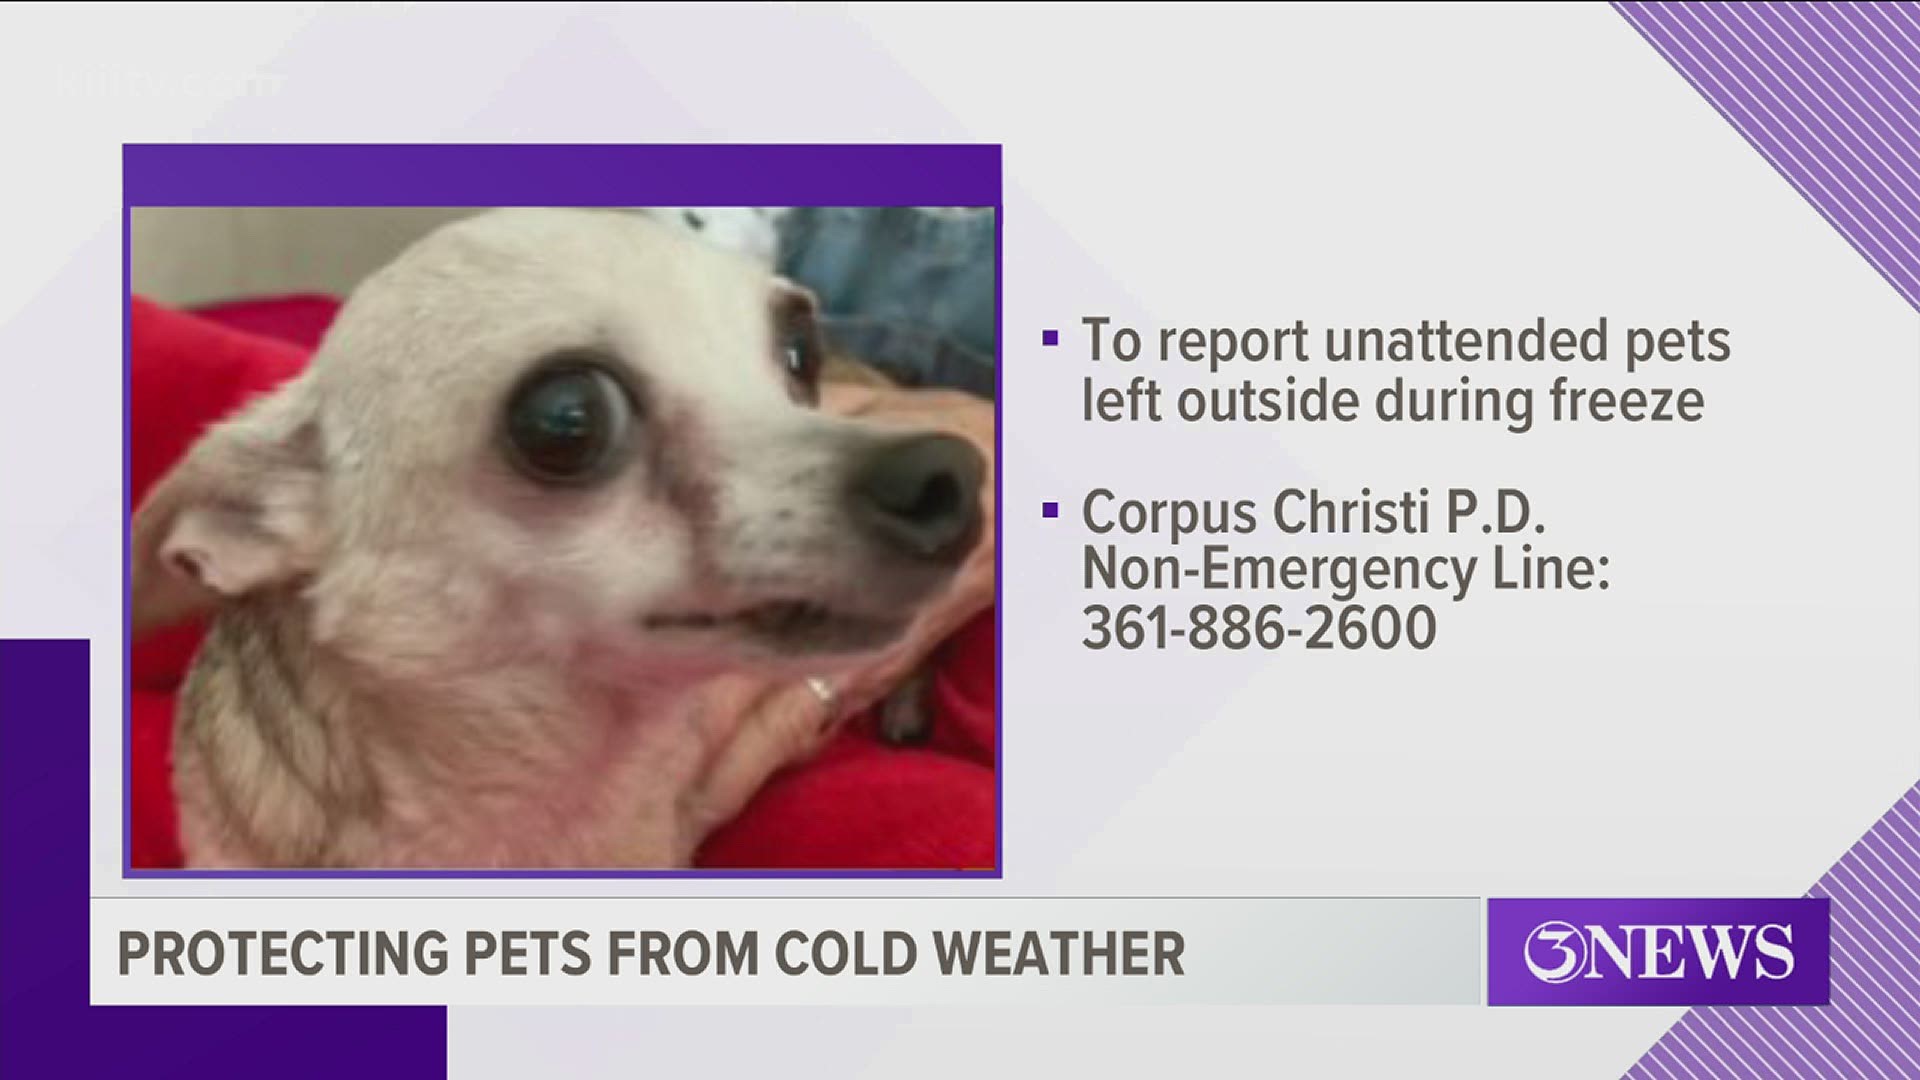 If you see a pet left unattended in the cold, call the Corpus Christi Police Department’s non-emergency line.